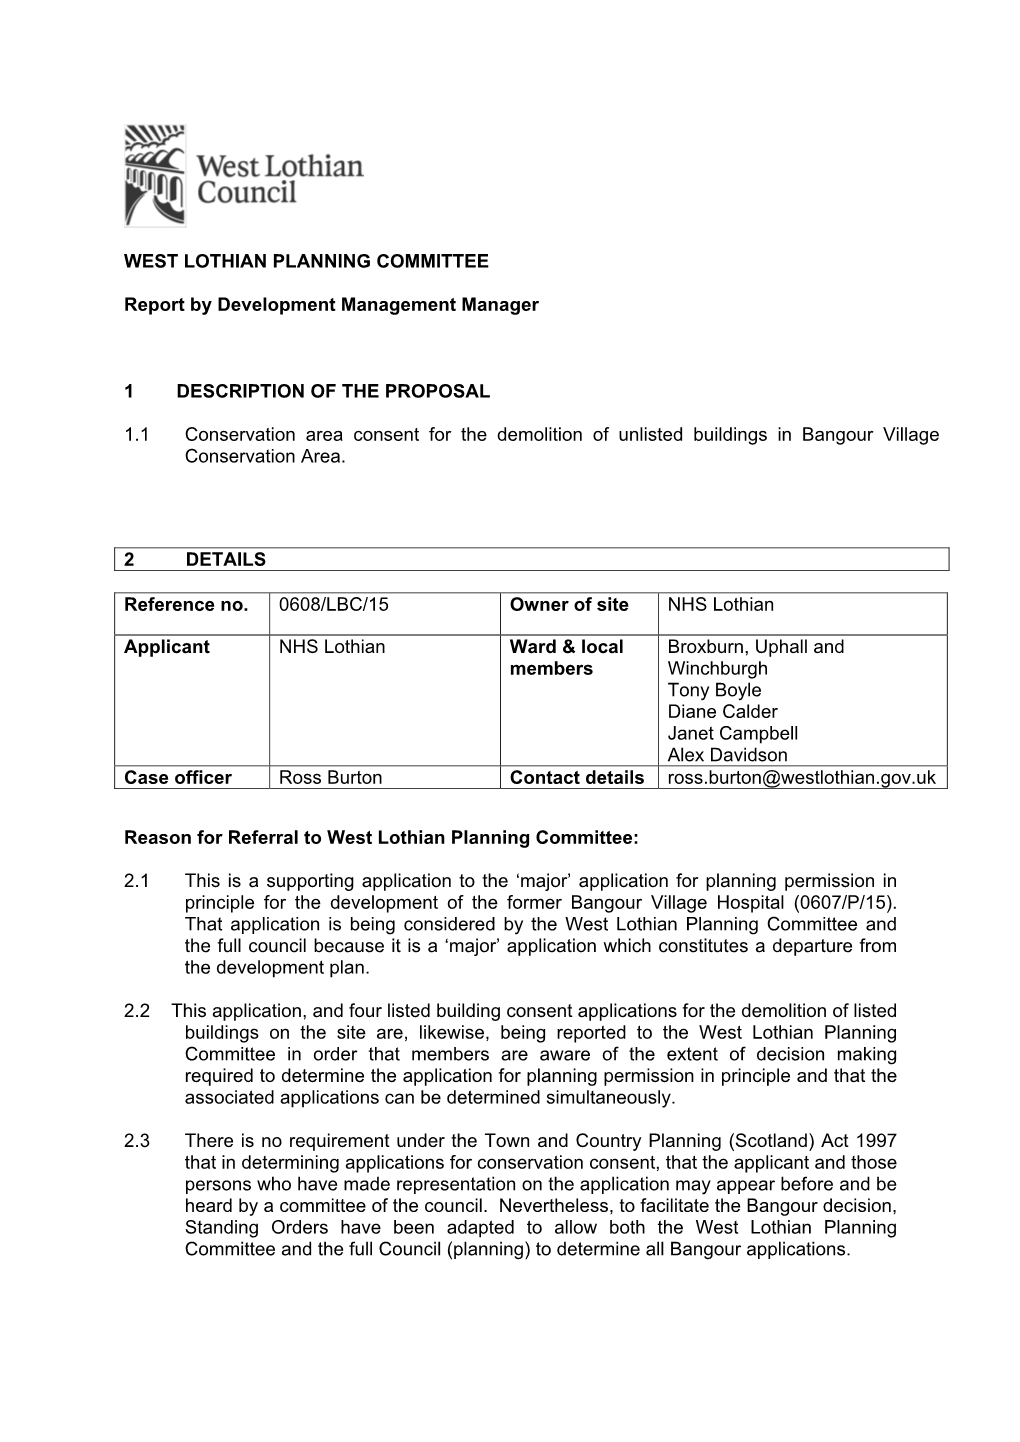 WEST LOTHIAN PLANNING COMMITTEE Report By